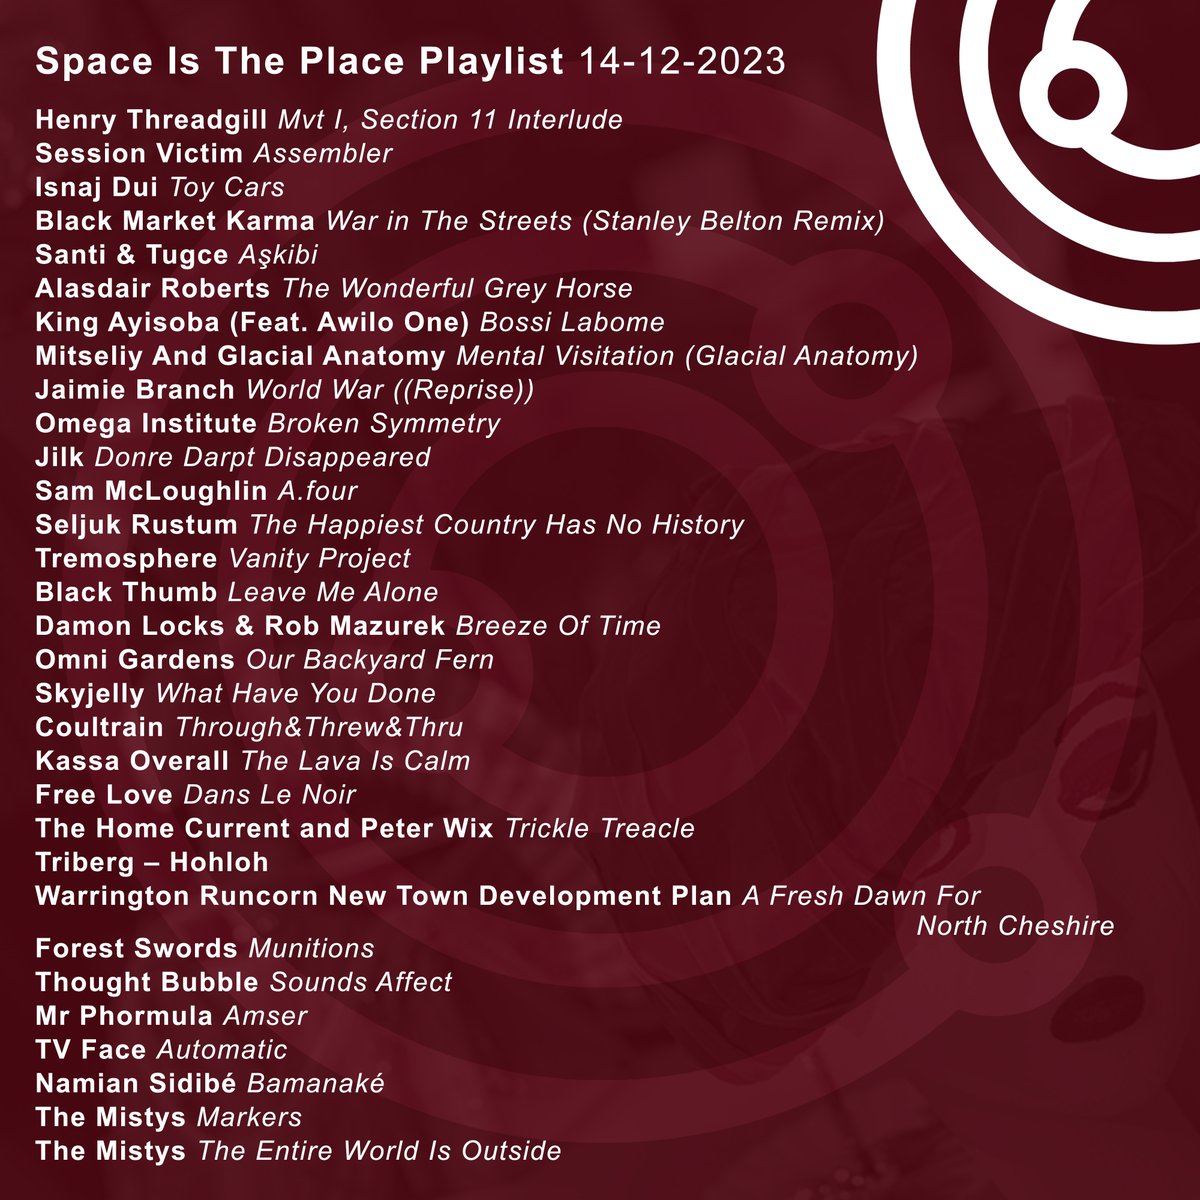 14-12-23 featuring the first of our top 50 of 2023. Great labels including @SpunOutSounds @577Records @SluggRecords @RidgeShady @AnticipatingN @moonglyph @WarpRecords @LostMap @bathurst_music @ninjatune @crackedankles. mixcloud.com/SpaceIsThePlac… podbean.com/ew/pb-tun98-15…